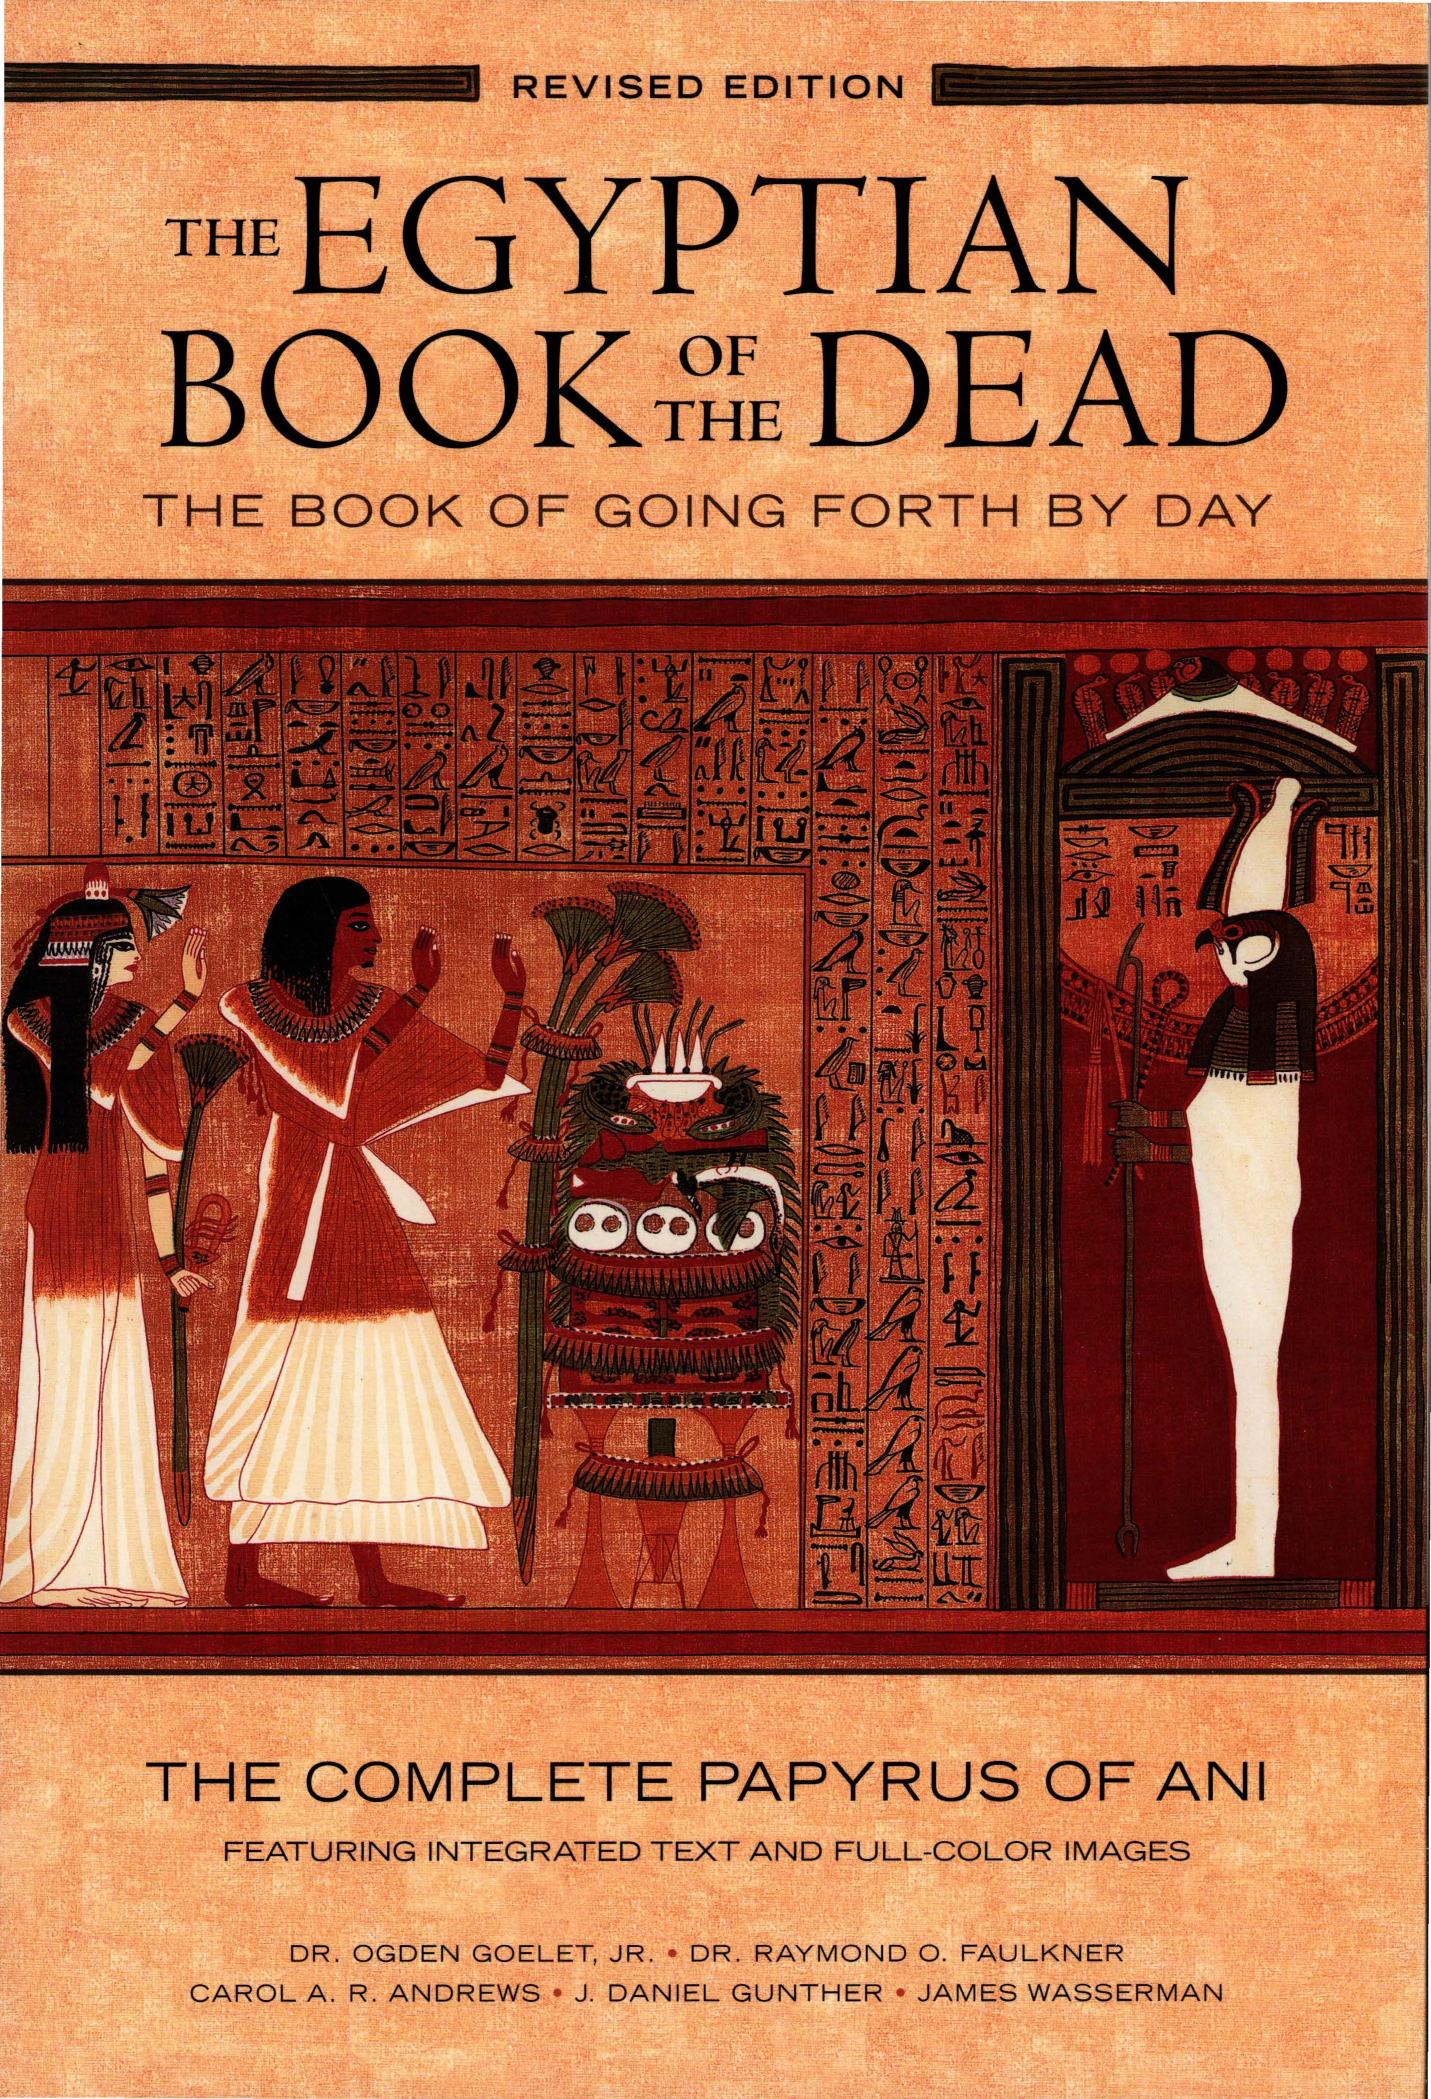 Egyptian Book of the Dead. The complete papyrus of Ani. Revised edition, new translation by Eva von Dassow